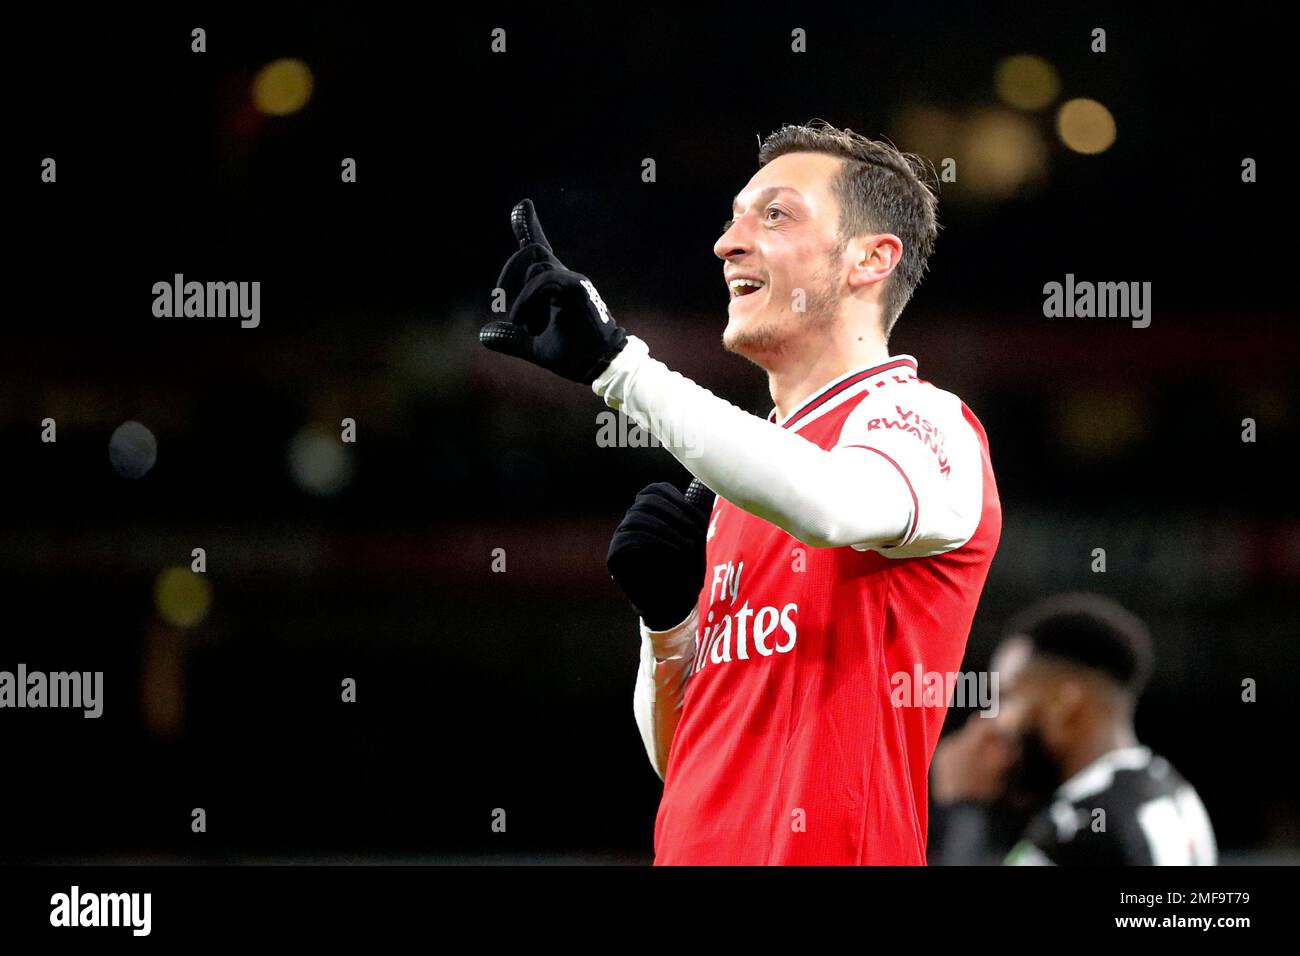 FILE - In this Sunday, Feb. 16, 2020 file photo, Arsenal's Mesut Ozil  celebrates after scoring his side's third goal during the English Premier  League soccer match between Arsenal and Newcastle at